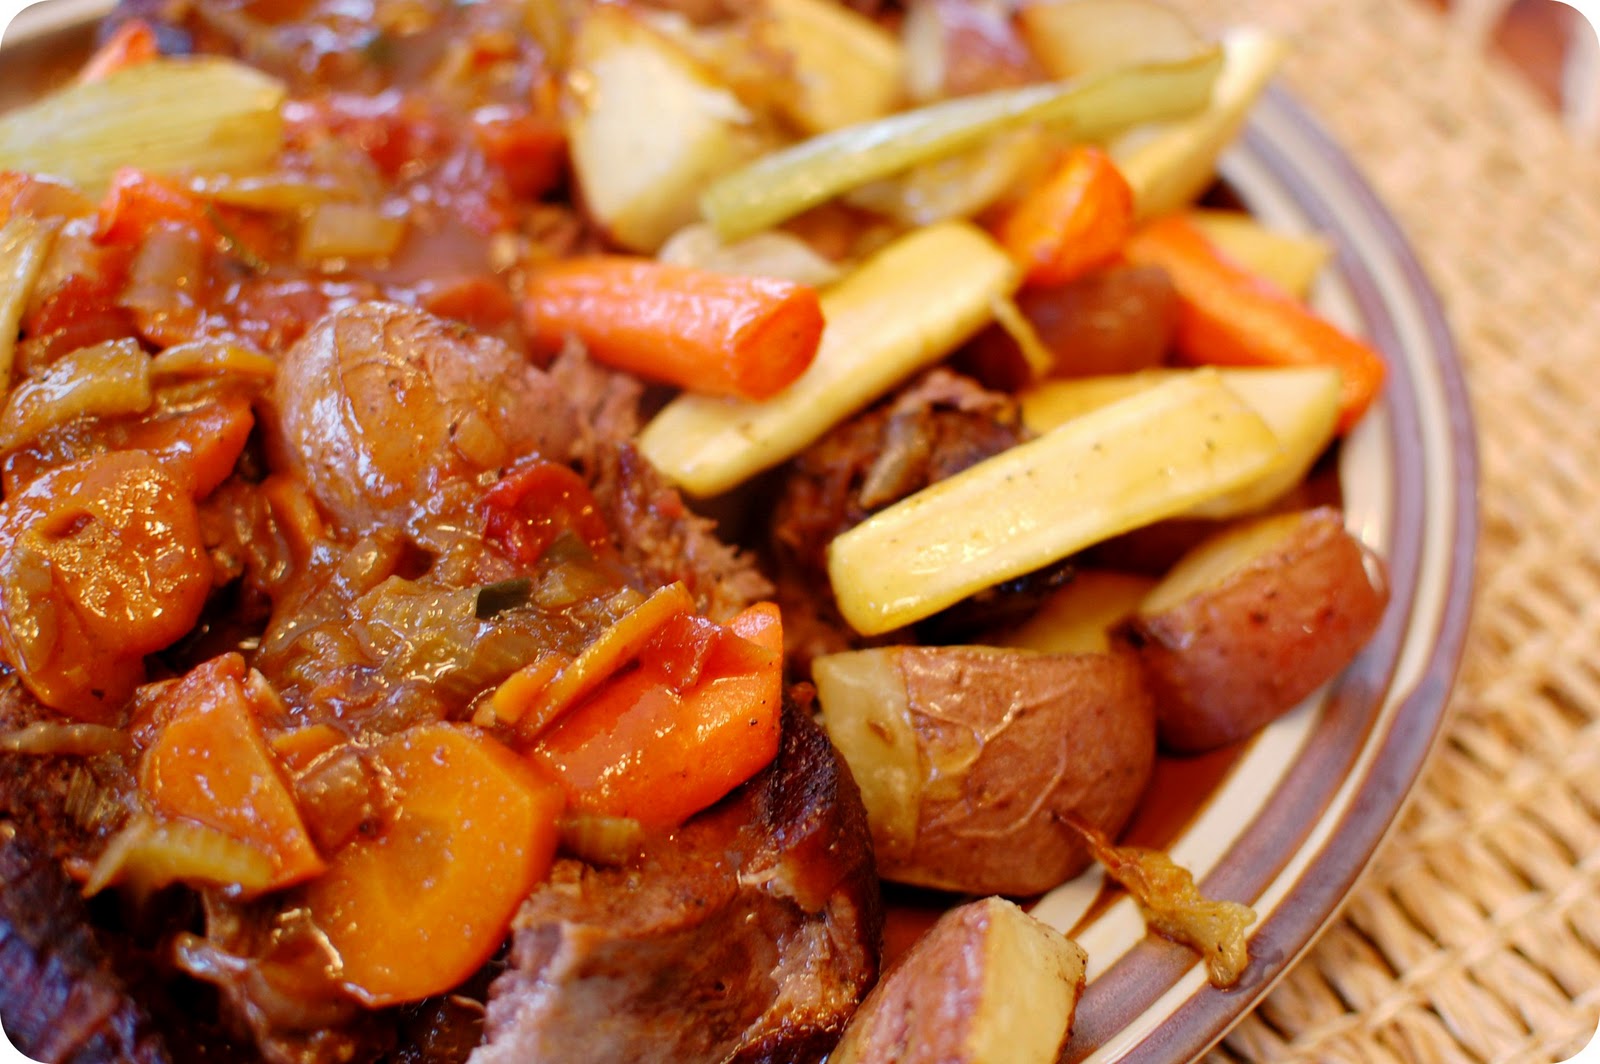 33 Shades of Green: Tasty Tuesdays...Pot Roast with Roasted Vegetables